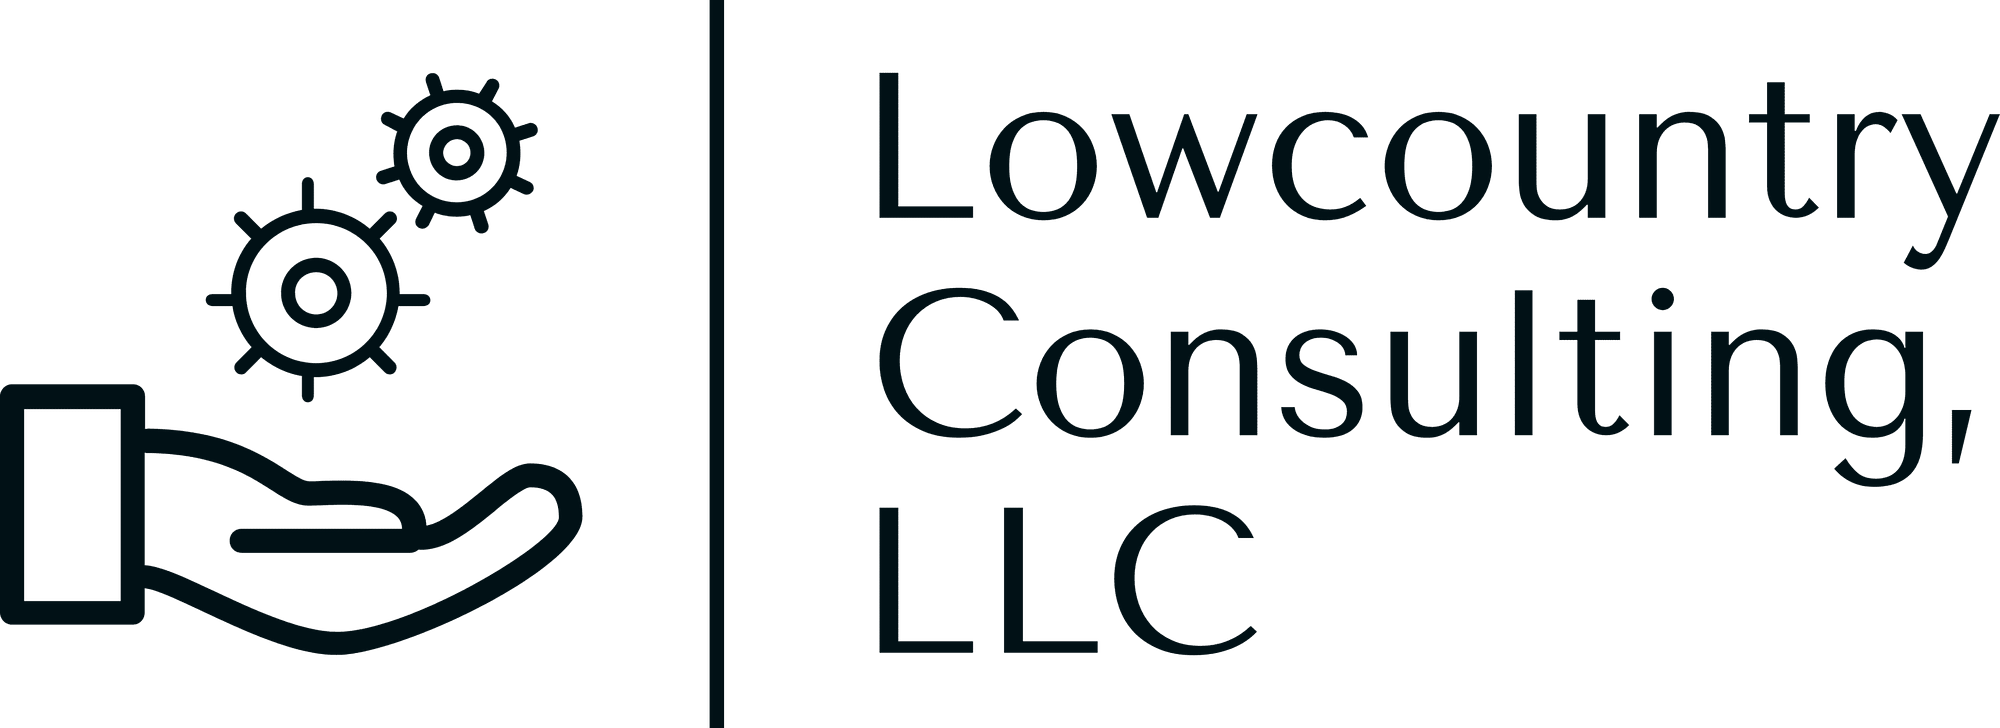 Lowcountry Consulting, LLC